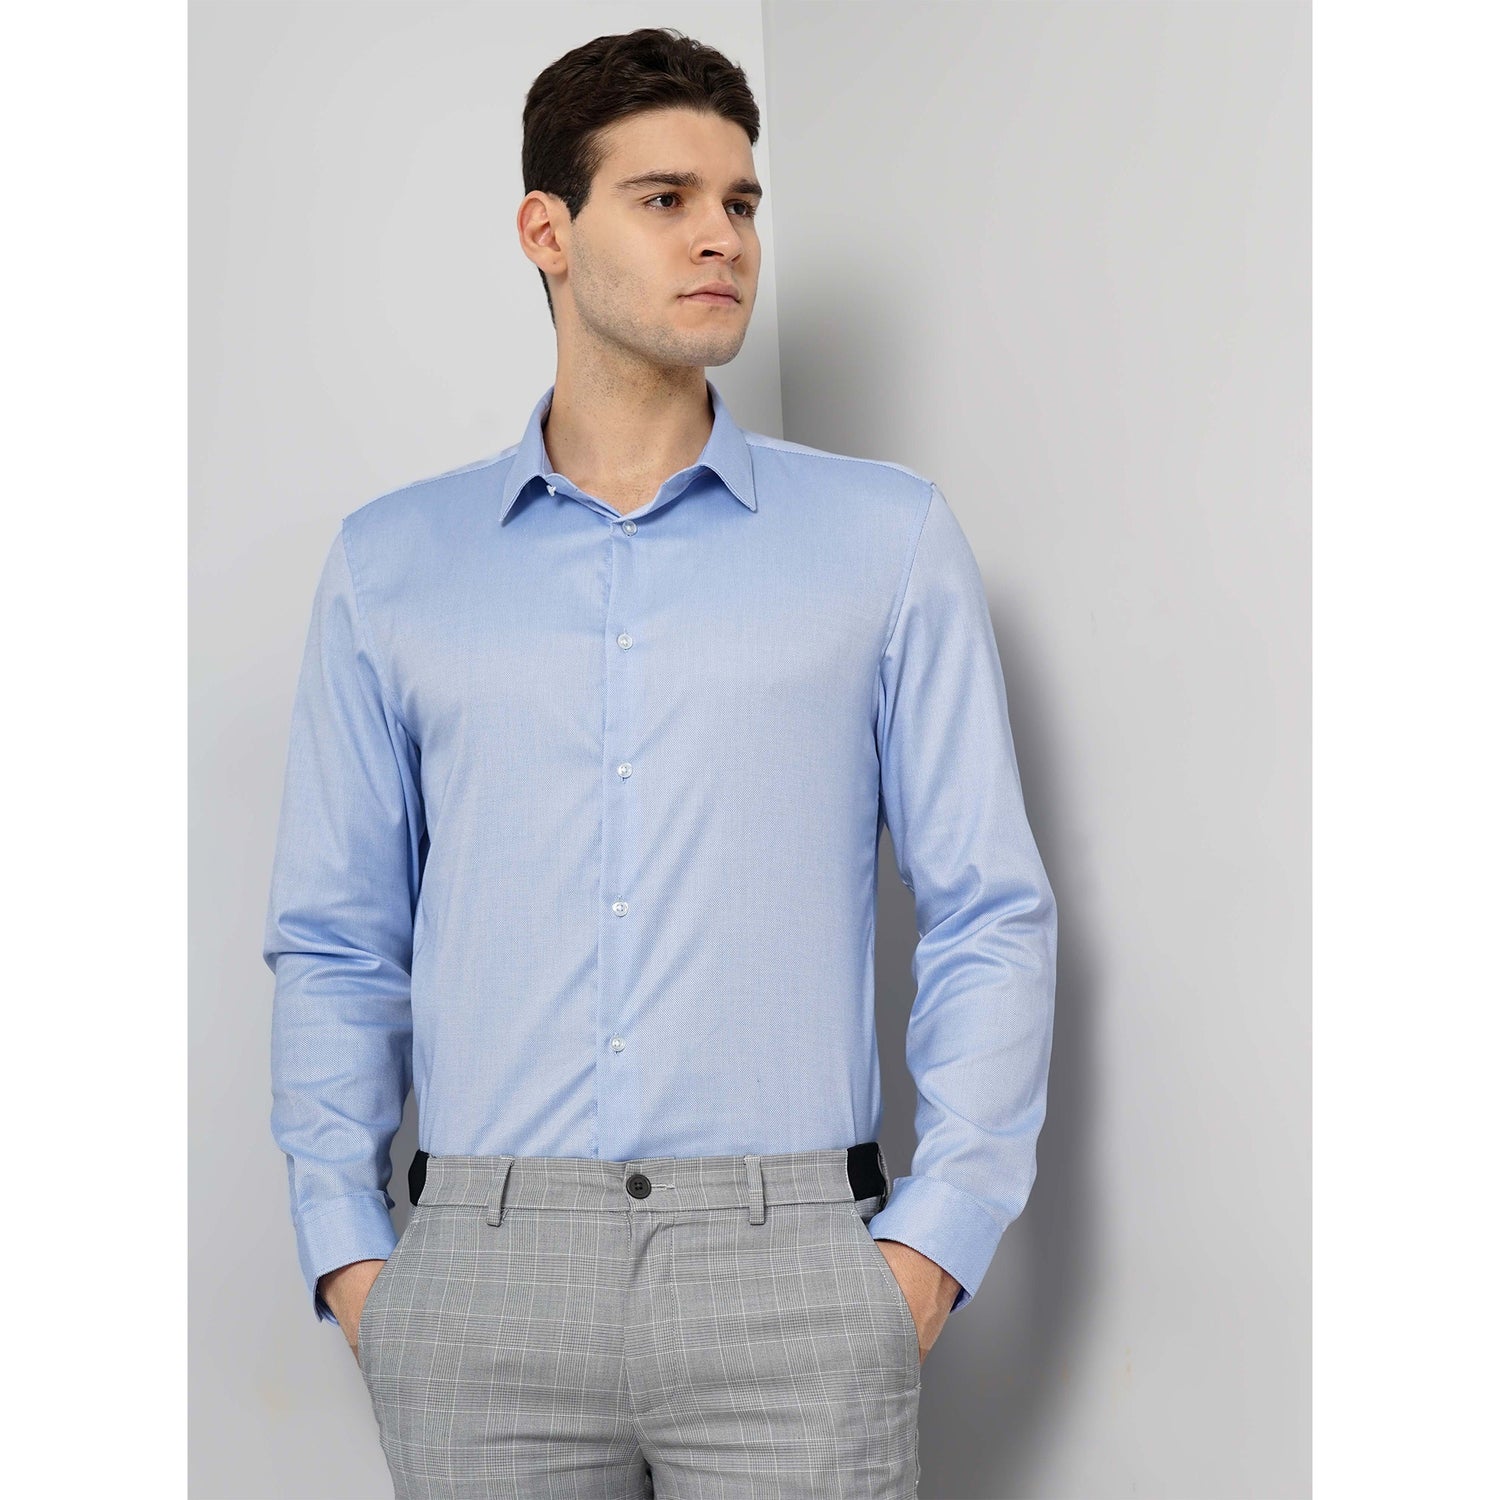 Cotton Blue Solid Oxford Shirt